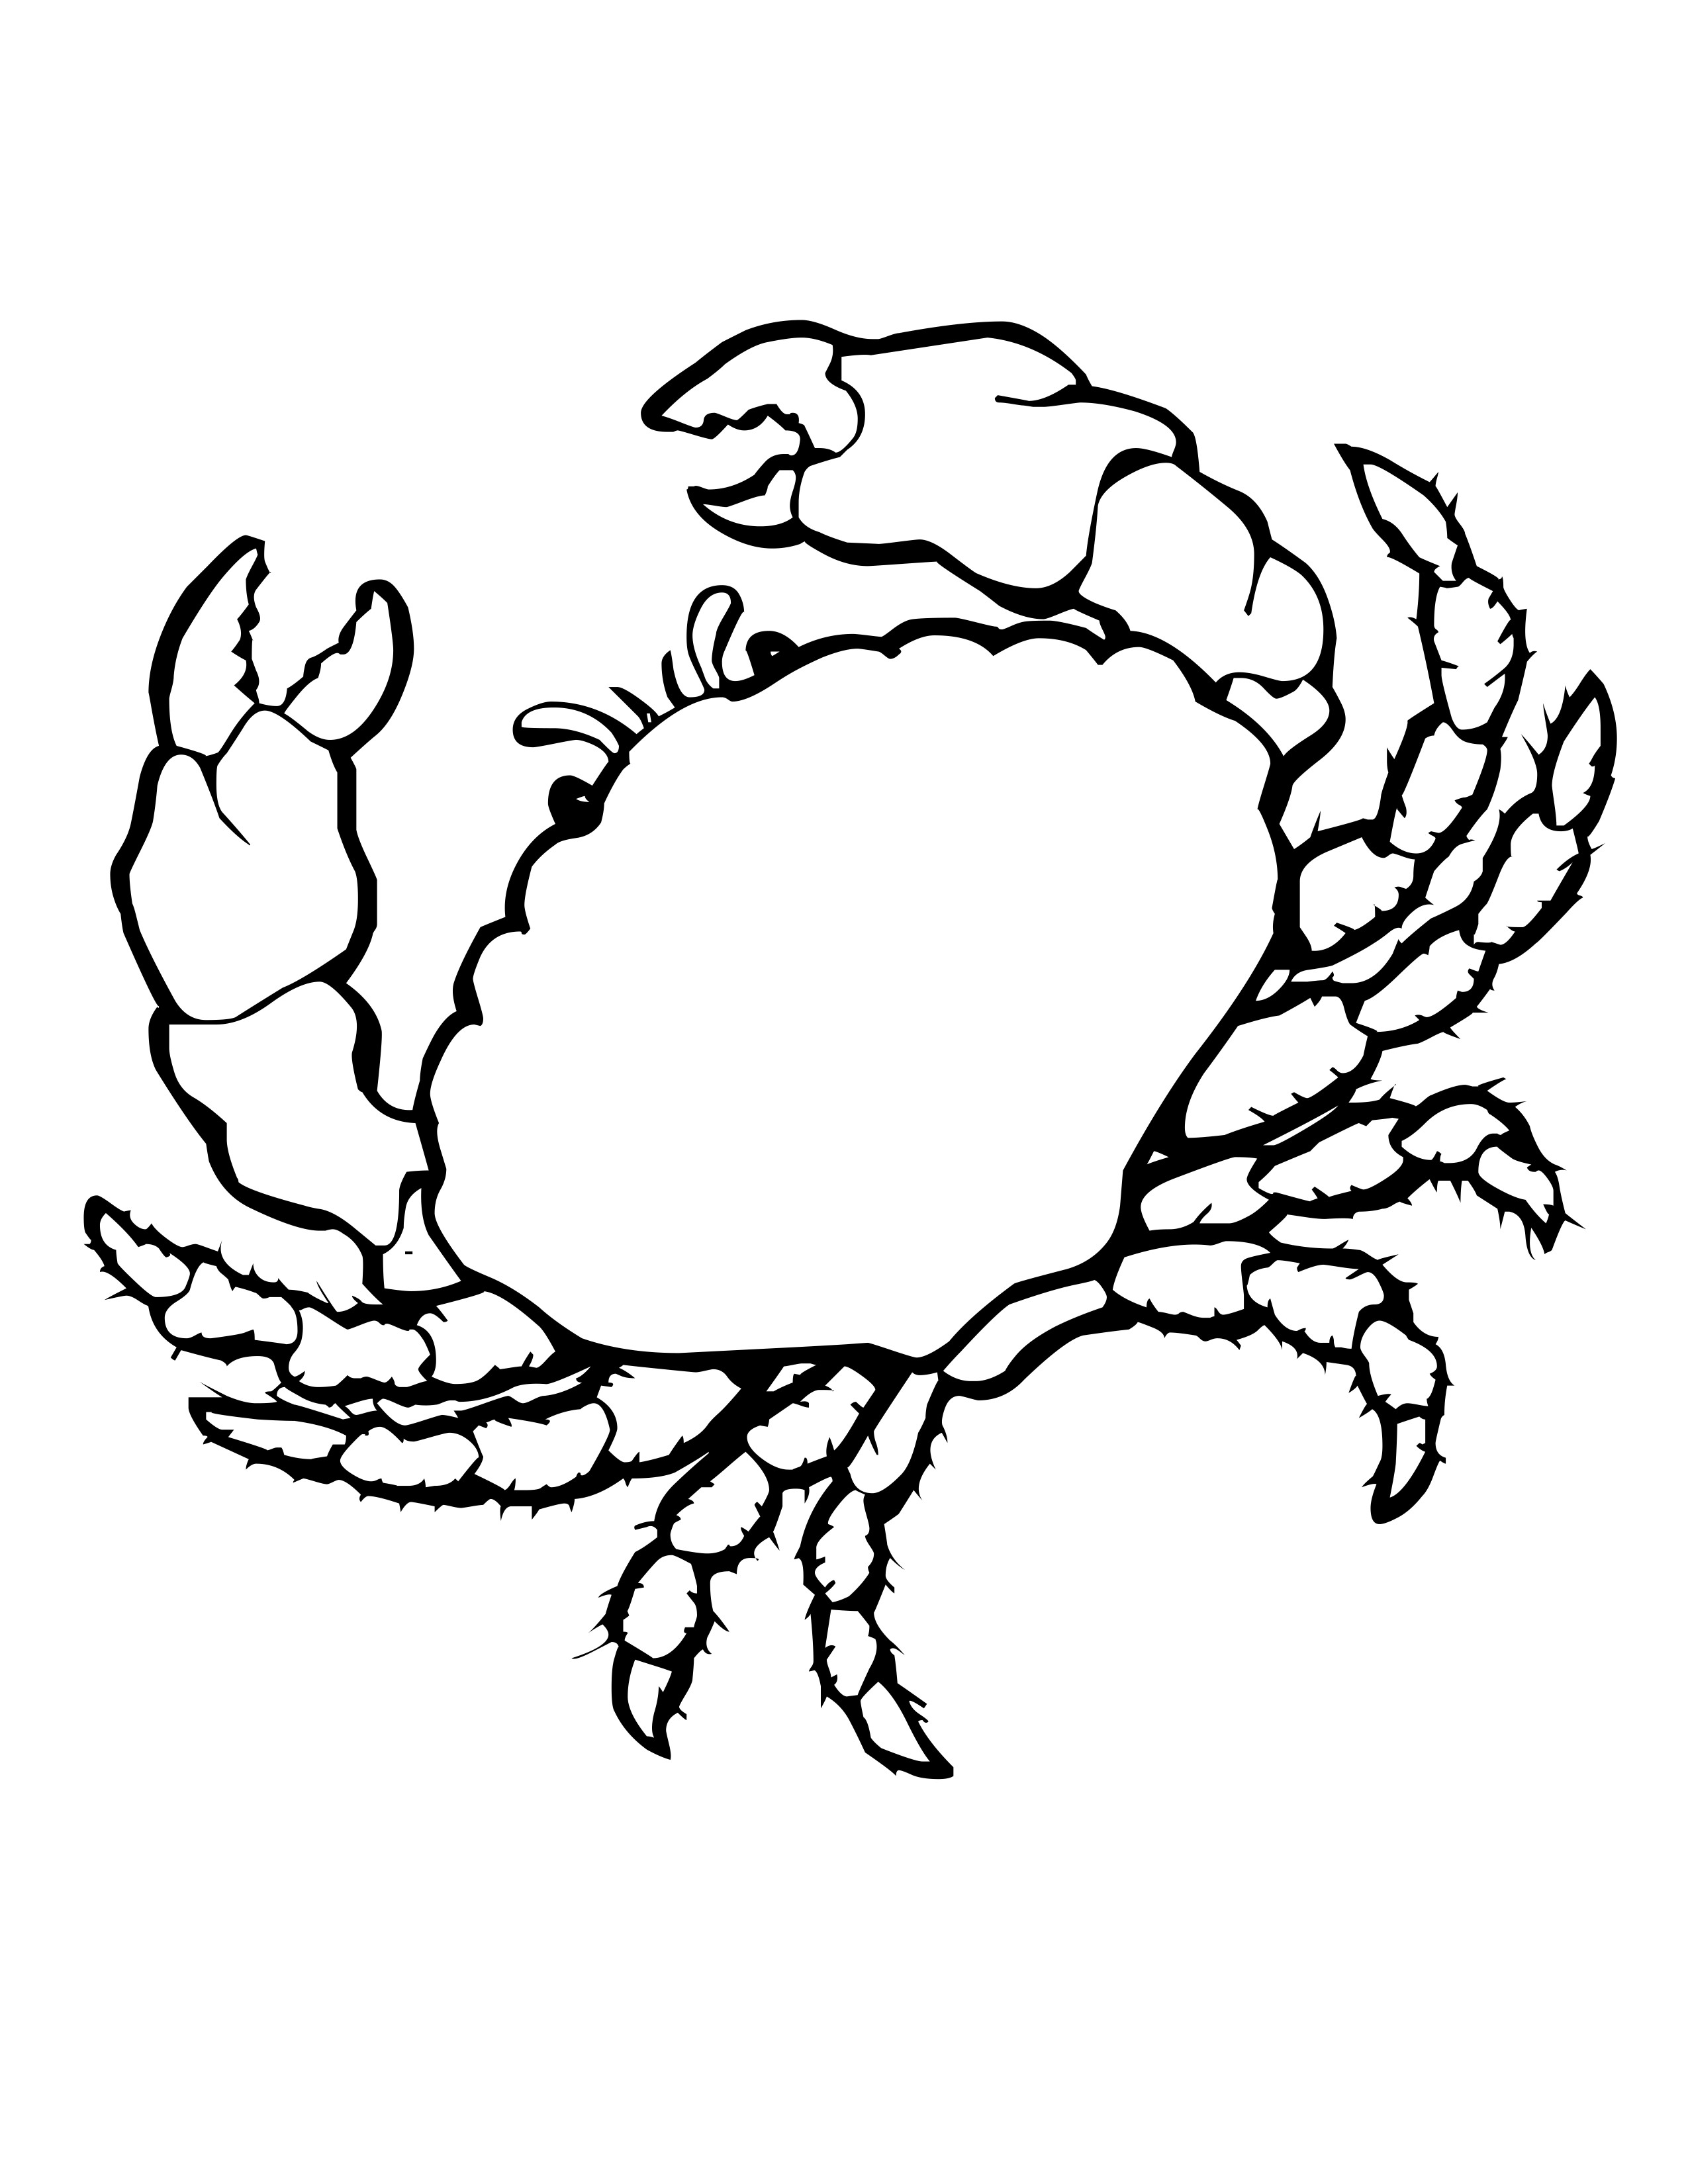 Coloring page: Crab (Animals) #4674 - Printable coloring pages